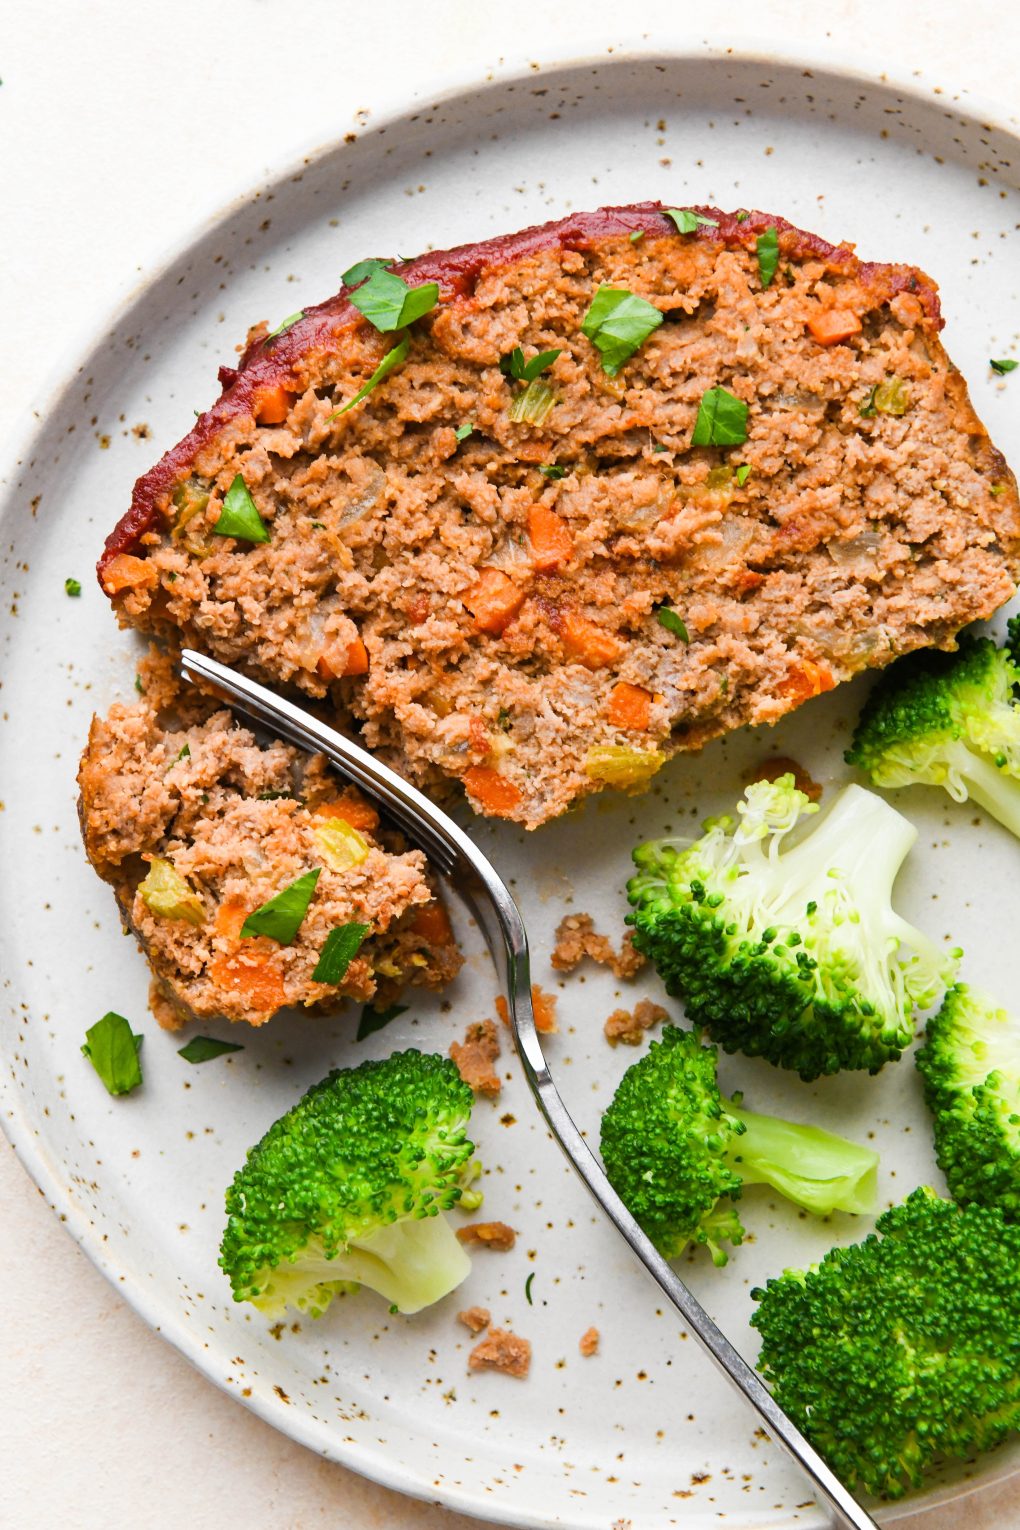 Close up image of a fork cutting into a slice of Whole30 meatloaf on a speckled plate next to a serving of steamed broccoli.